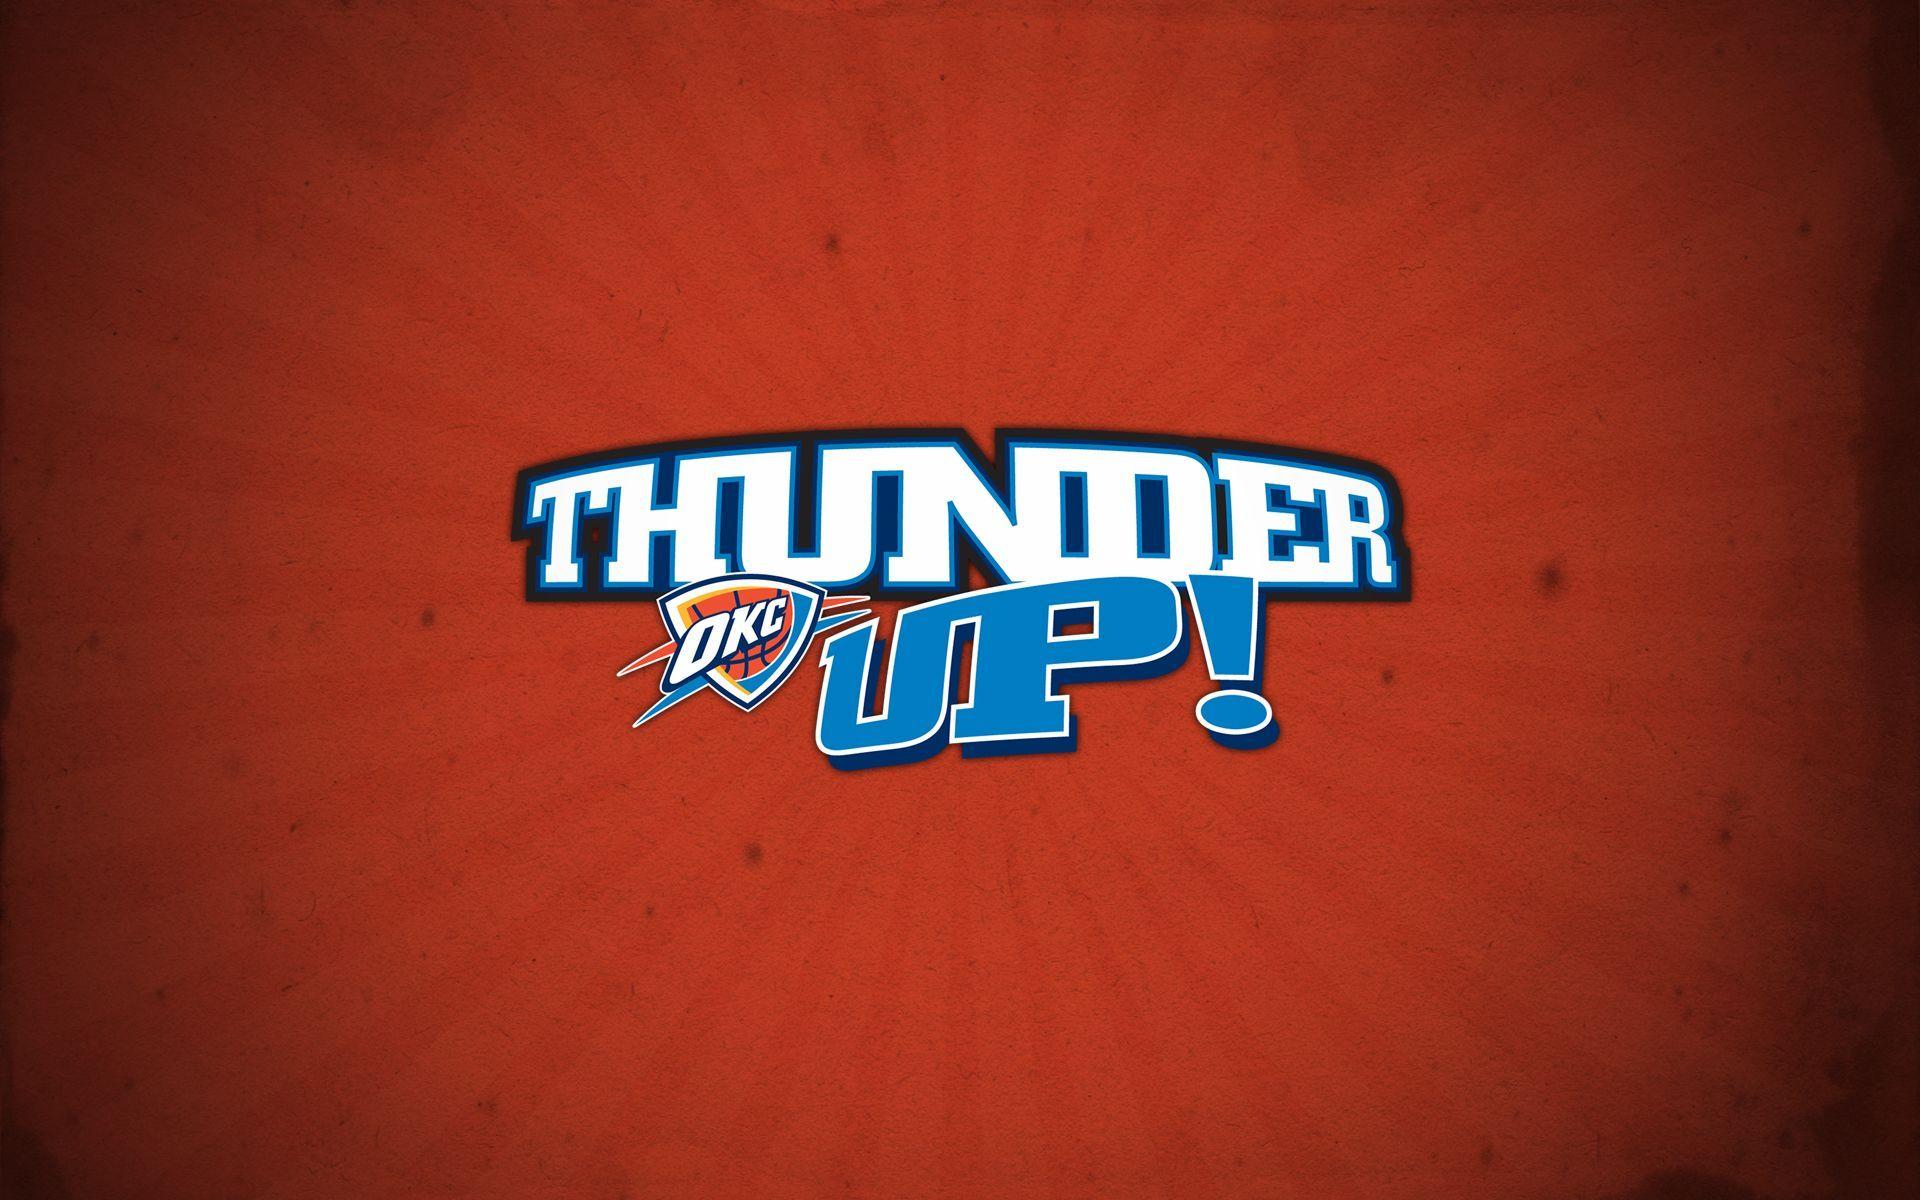 Okc Thunder. Thunder Up With These Traction Designed Wallpaper